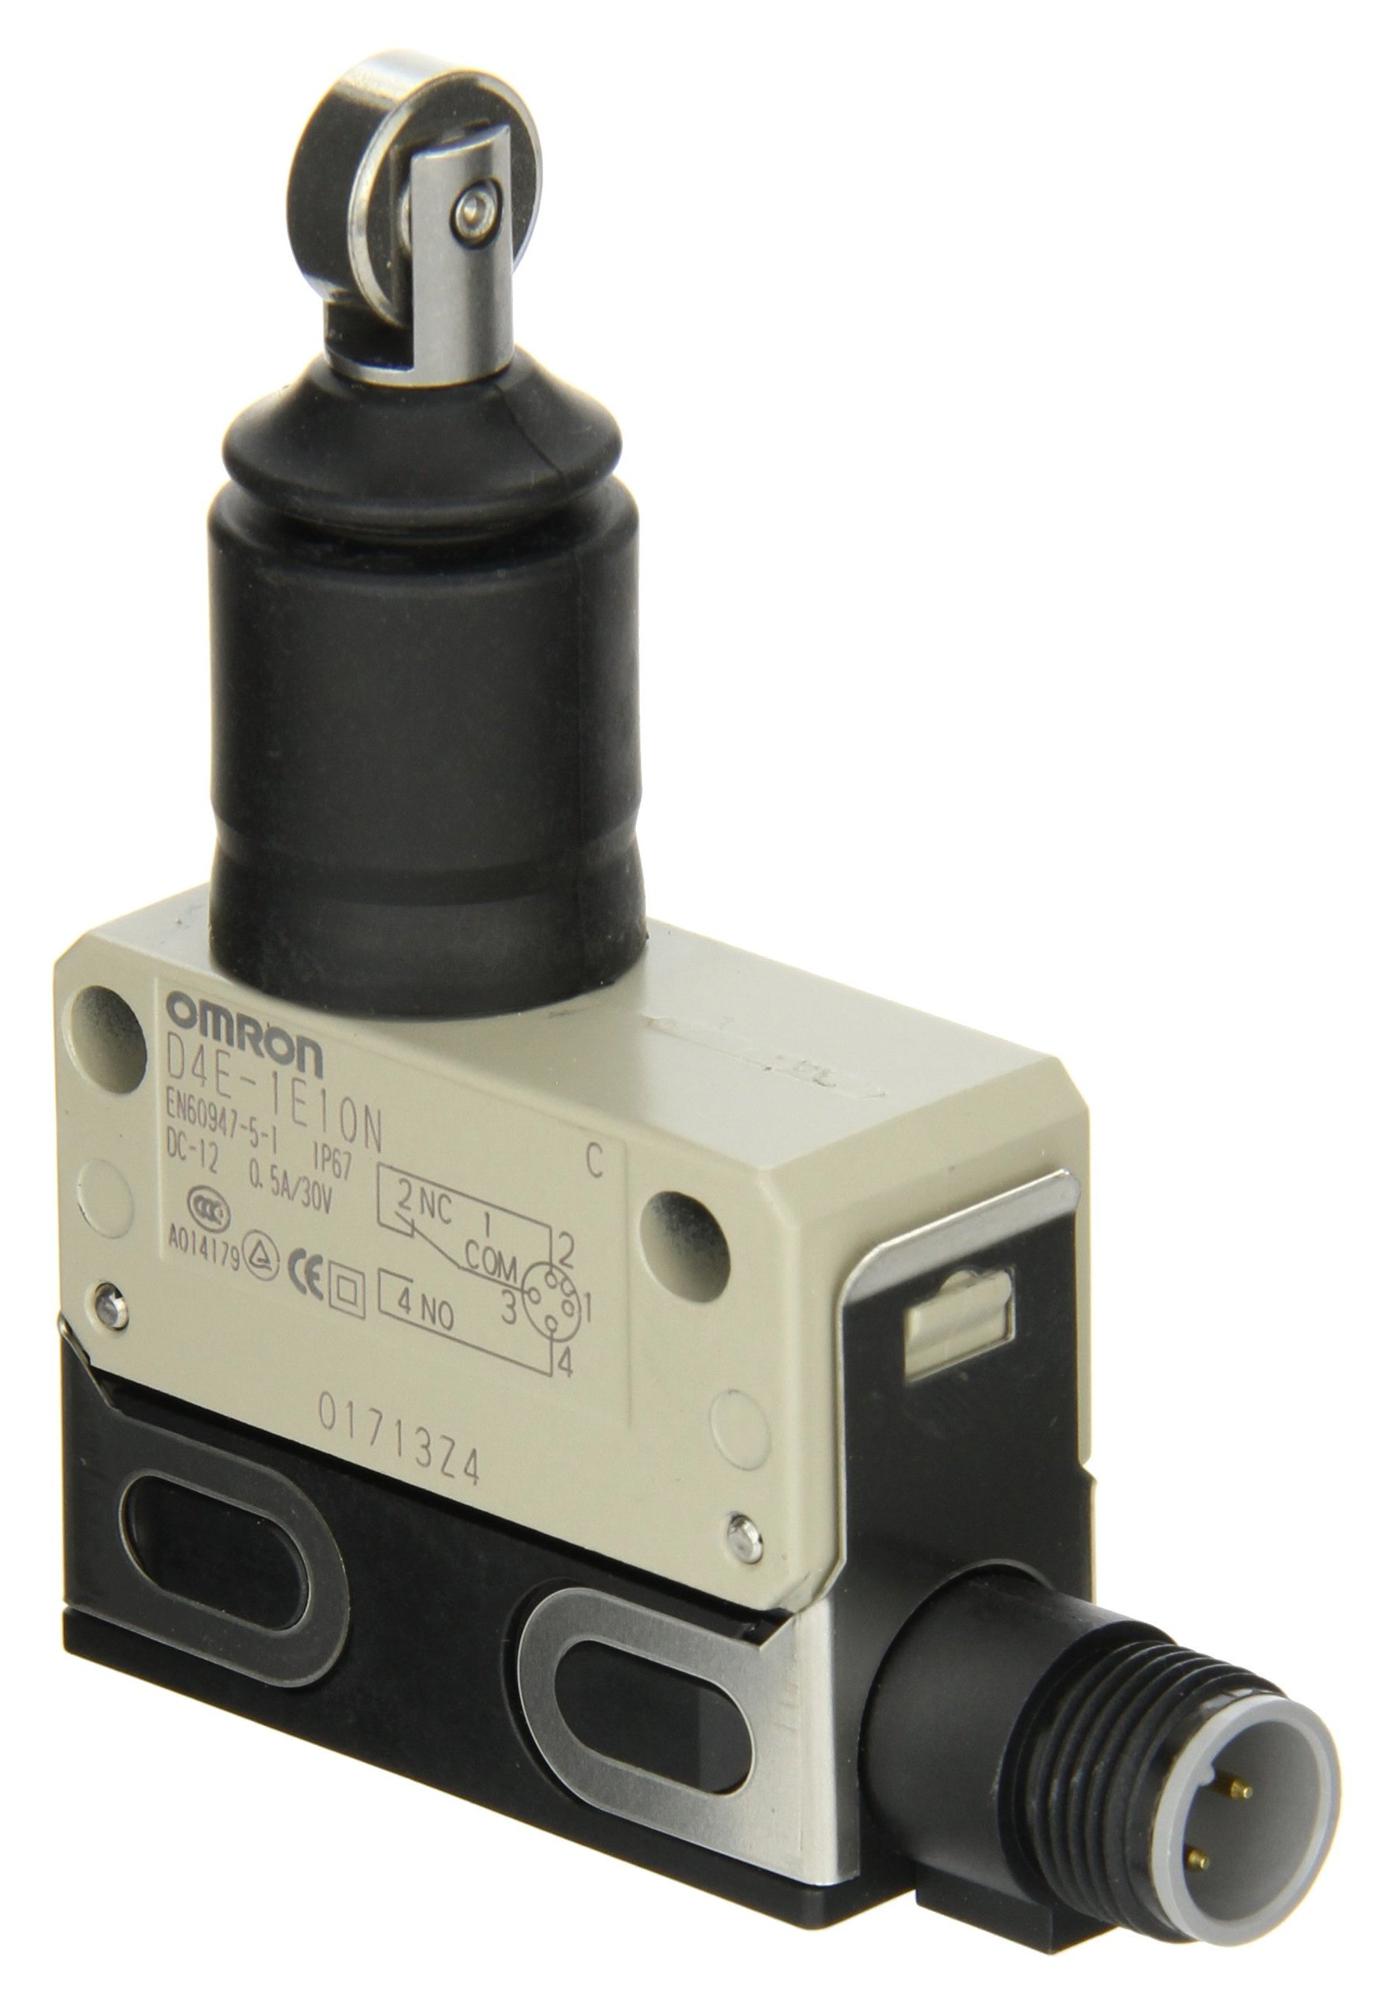 D4E-1E10N LIMIT SWITCH SWITCHES OMRON